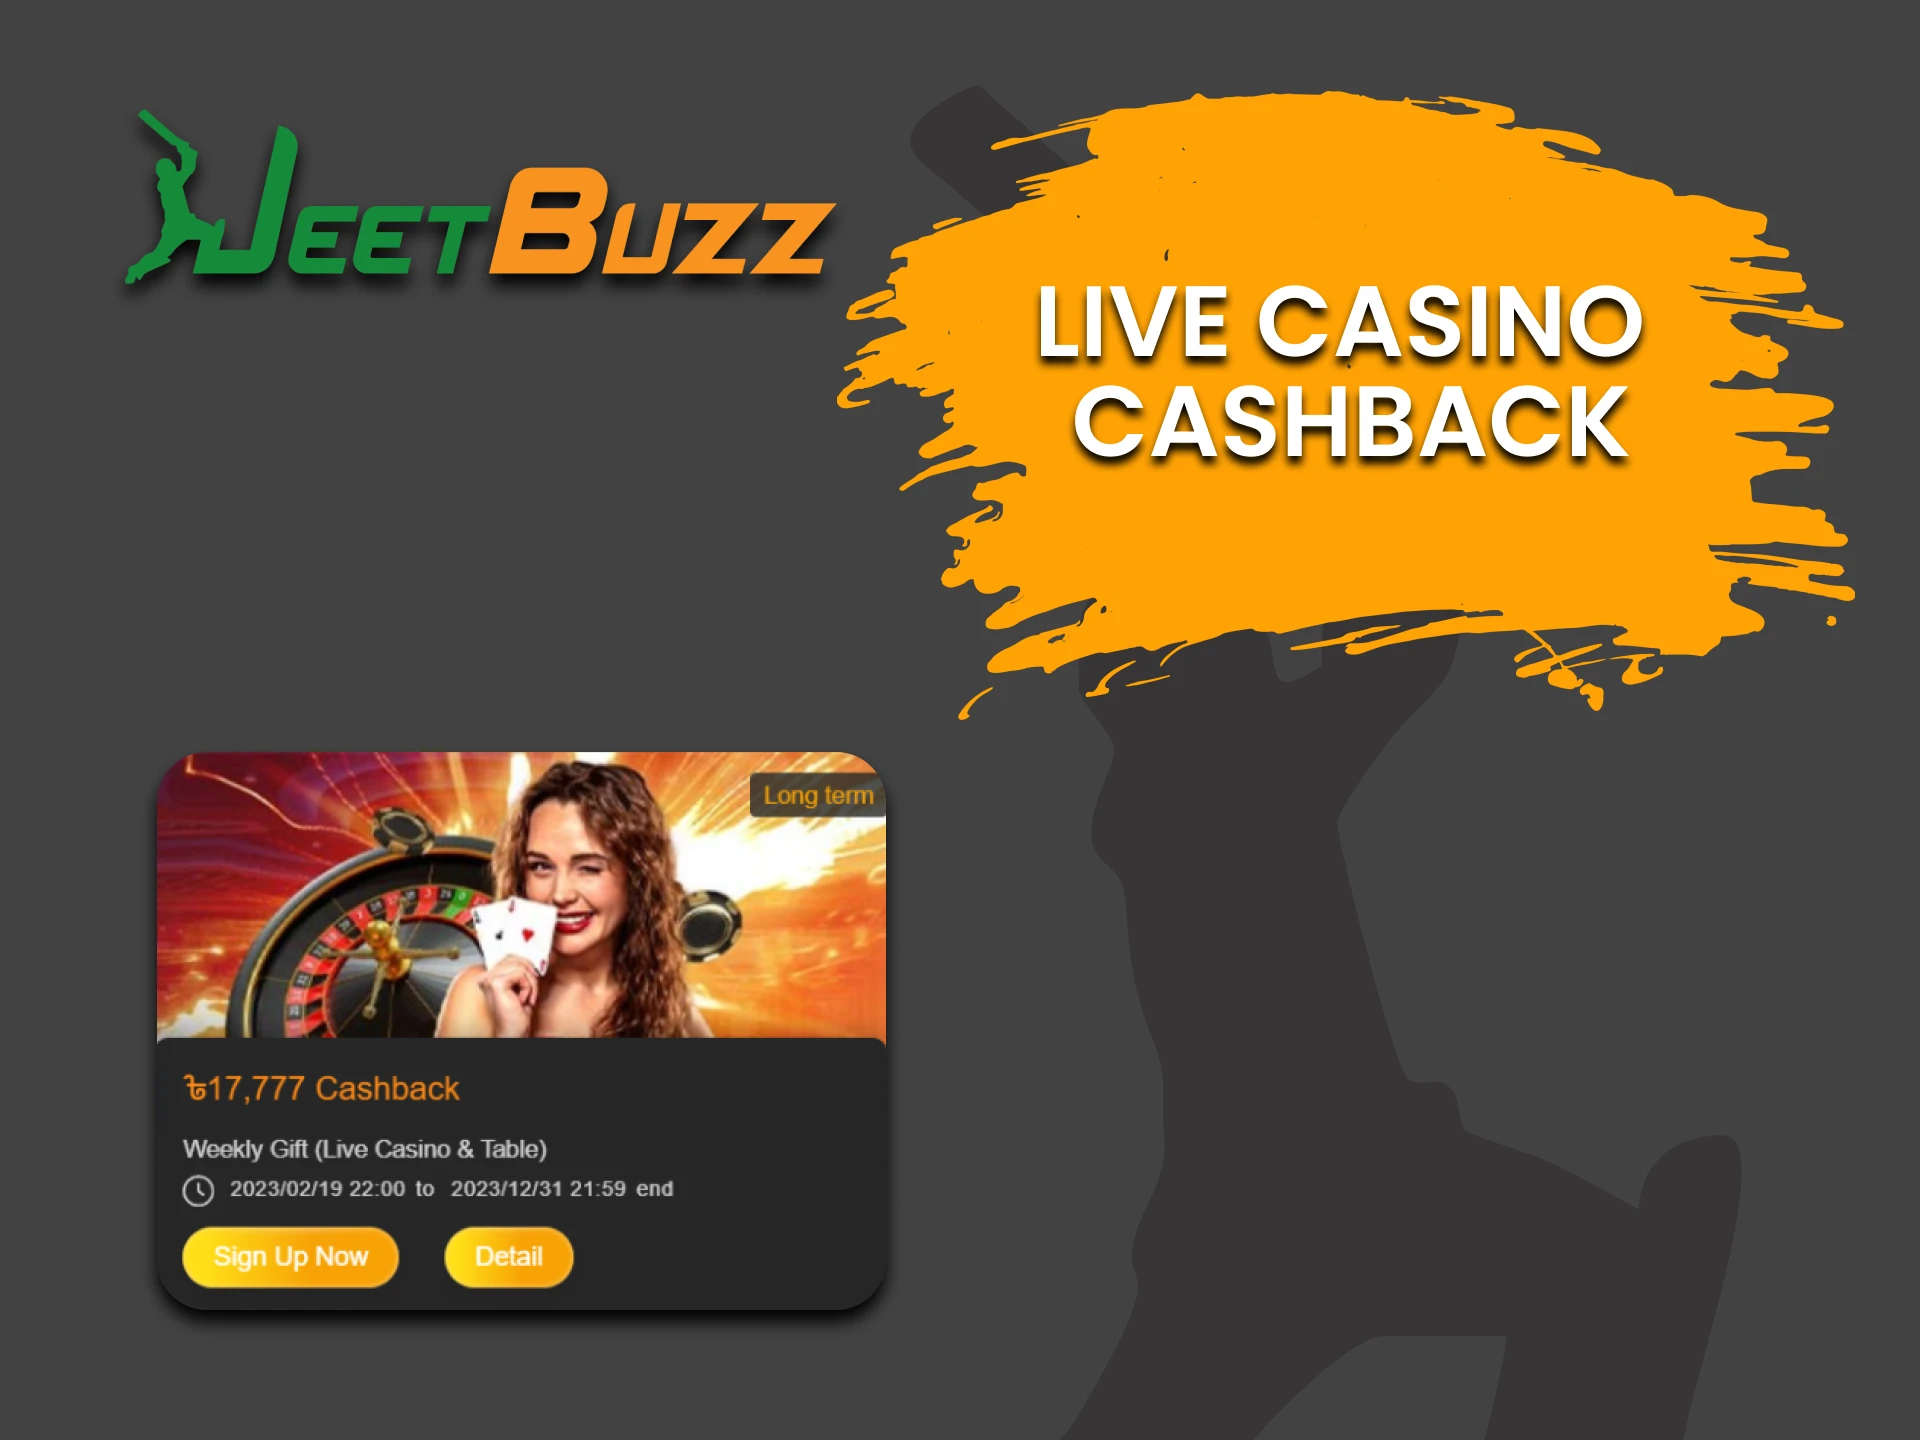 JeetBuzz gives cashback for live casino.